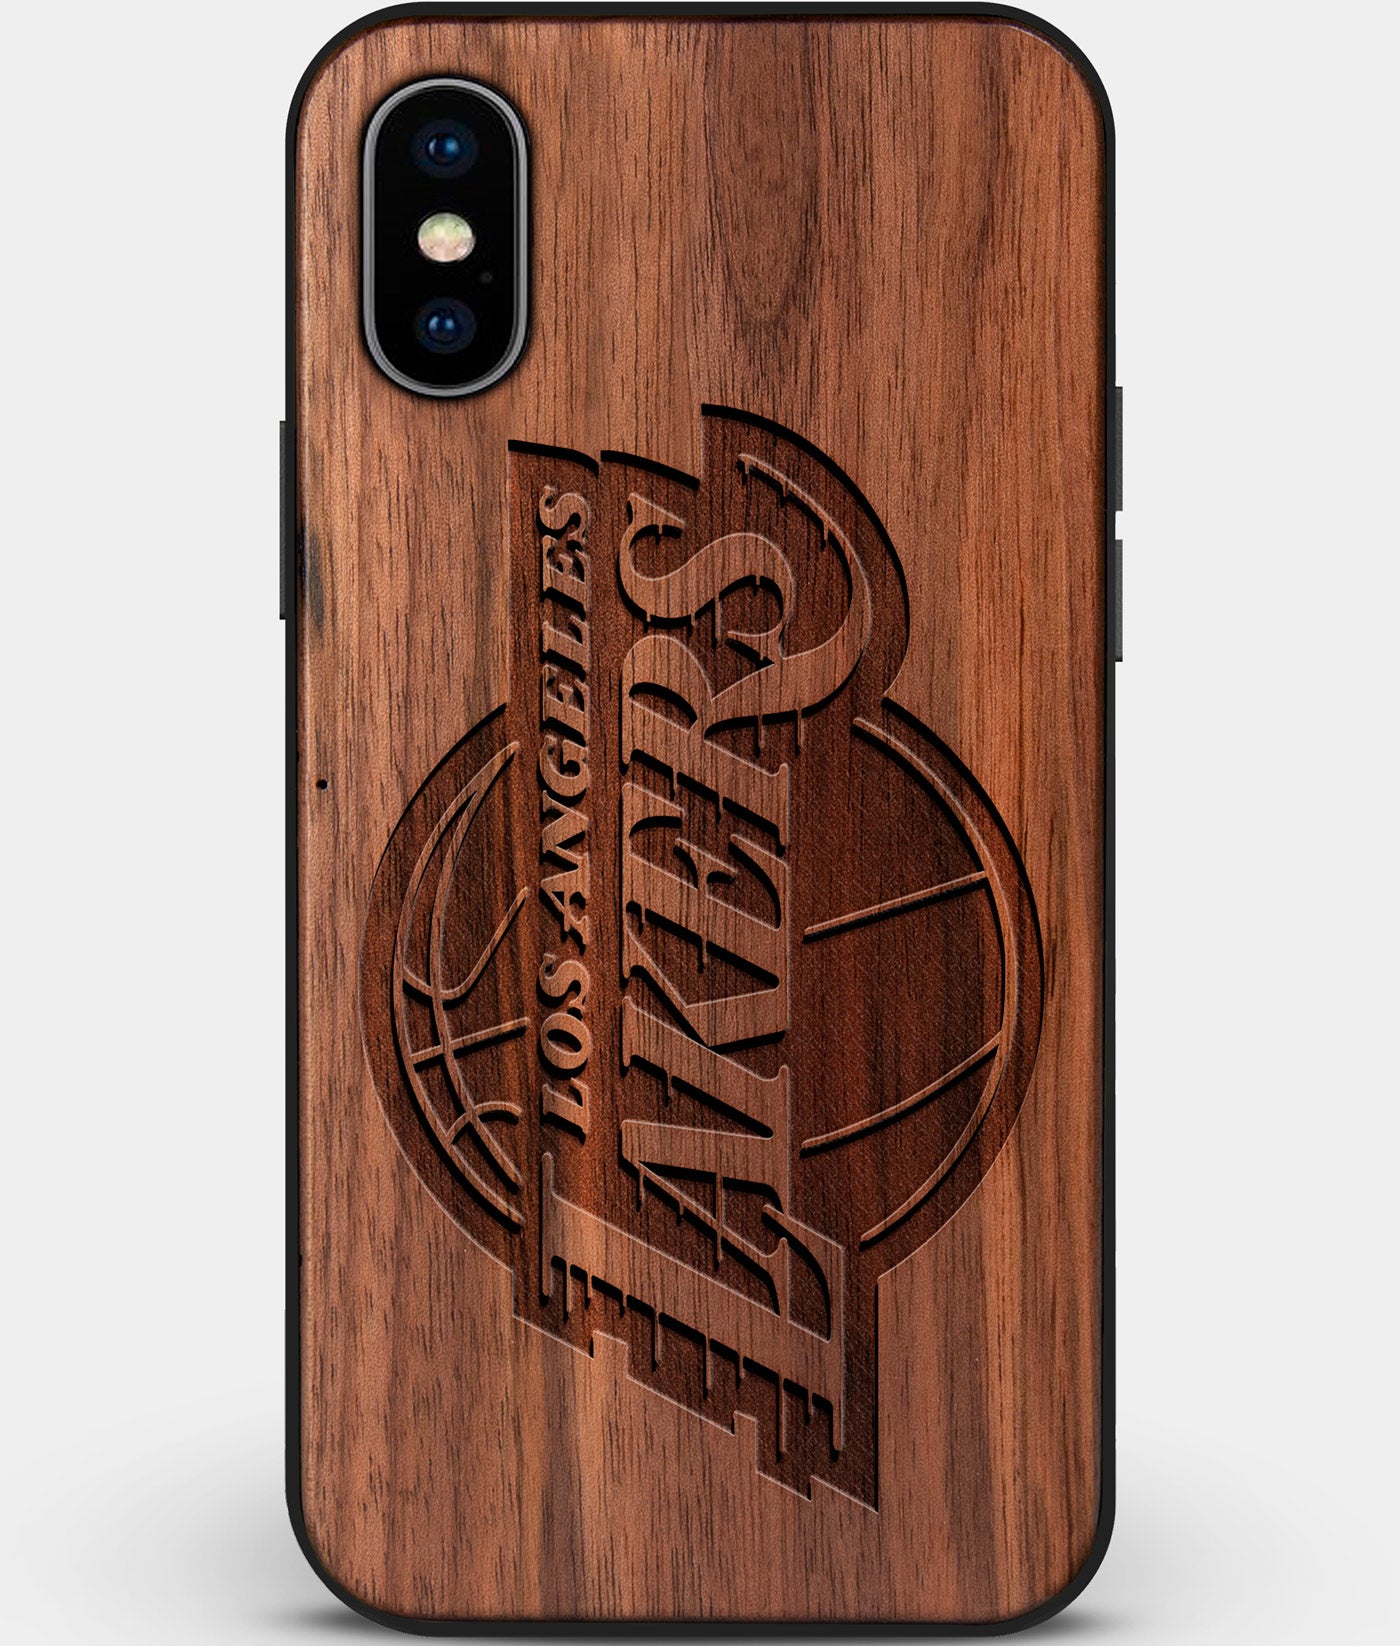 Custom Carved Wood Los Angeles Lakers iPhone X/XS Case | Personalized Walnut Wood Los Angeles Lakers Cover, Birthday Gift, Gifts For Him, Monogrammed Gift For Fan | by Engraved In Nature